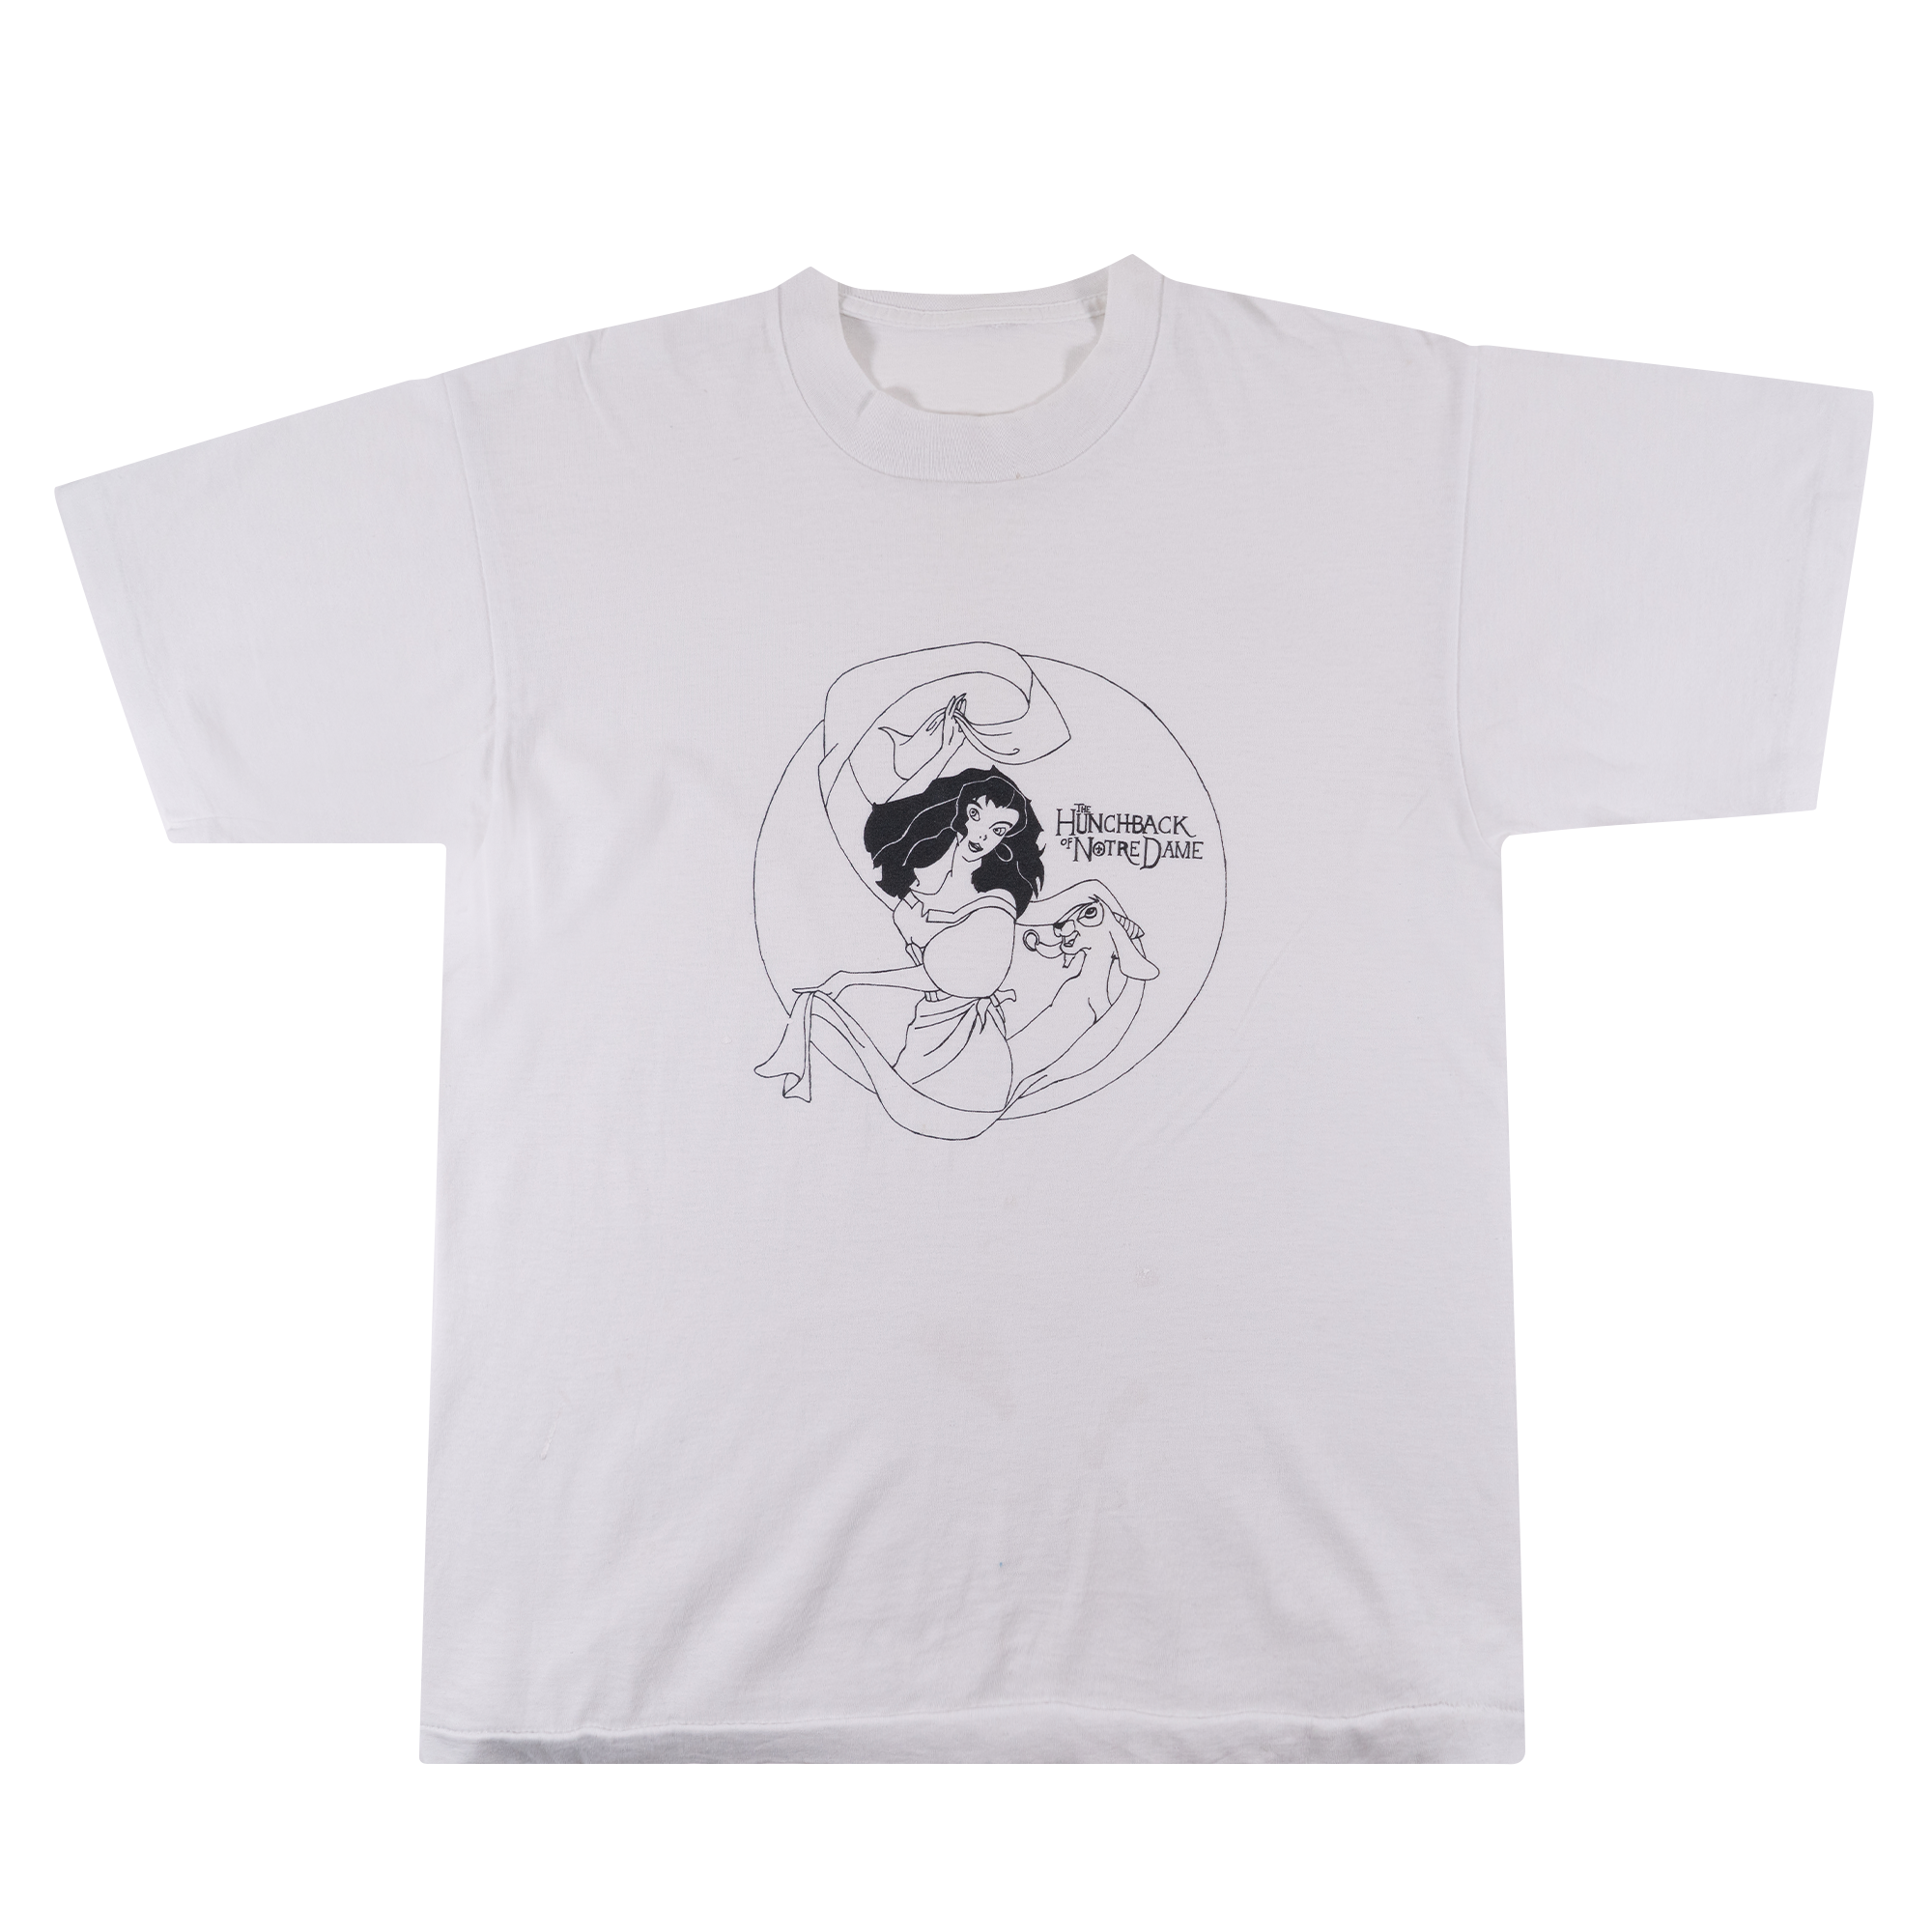 The Hunchback of Notre Dame "Colour Yourself" Disney Tee White-PLUS